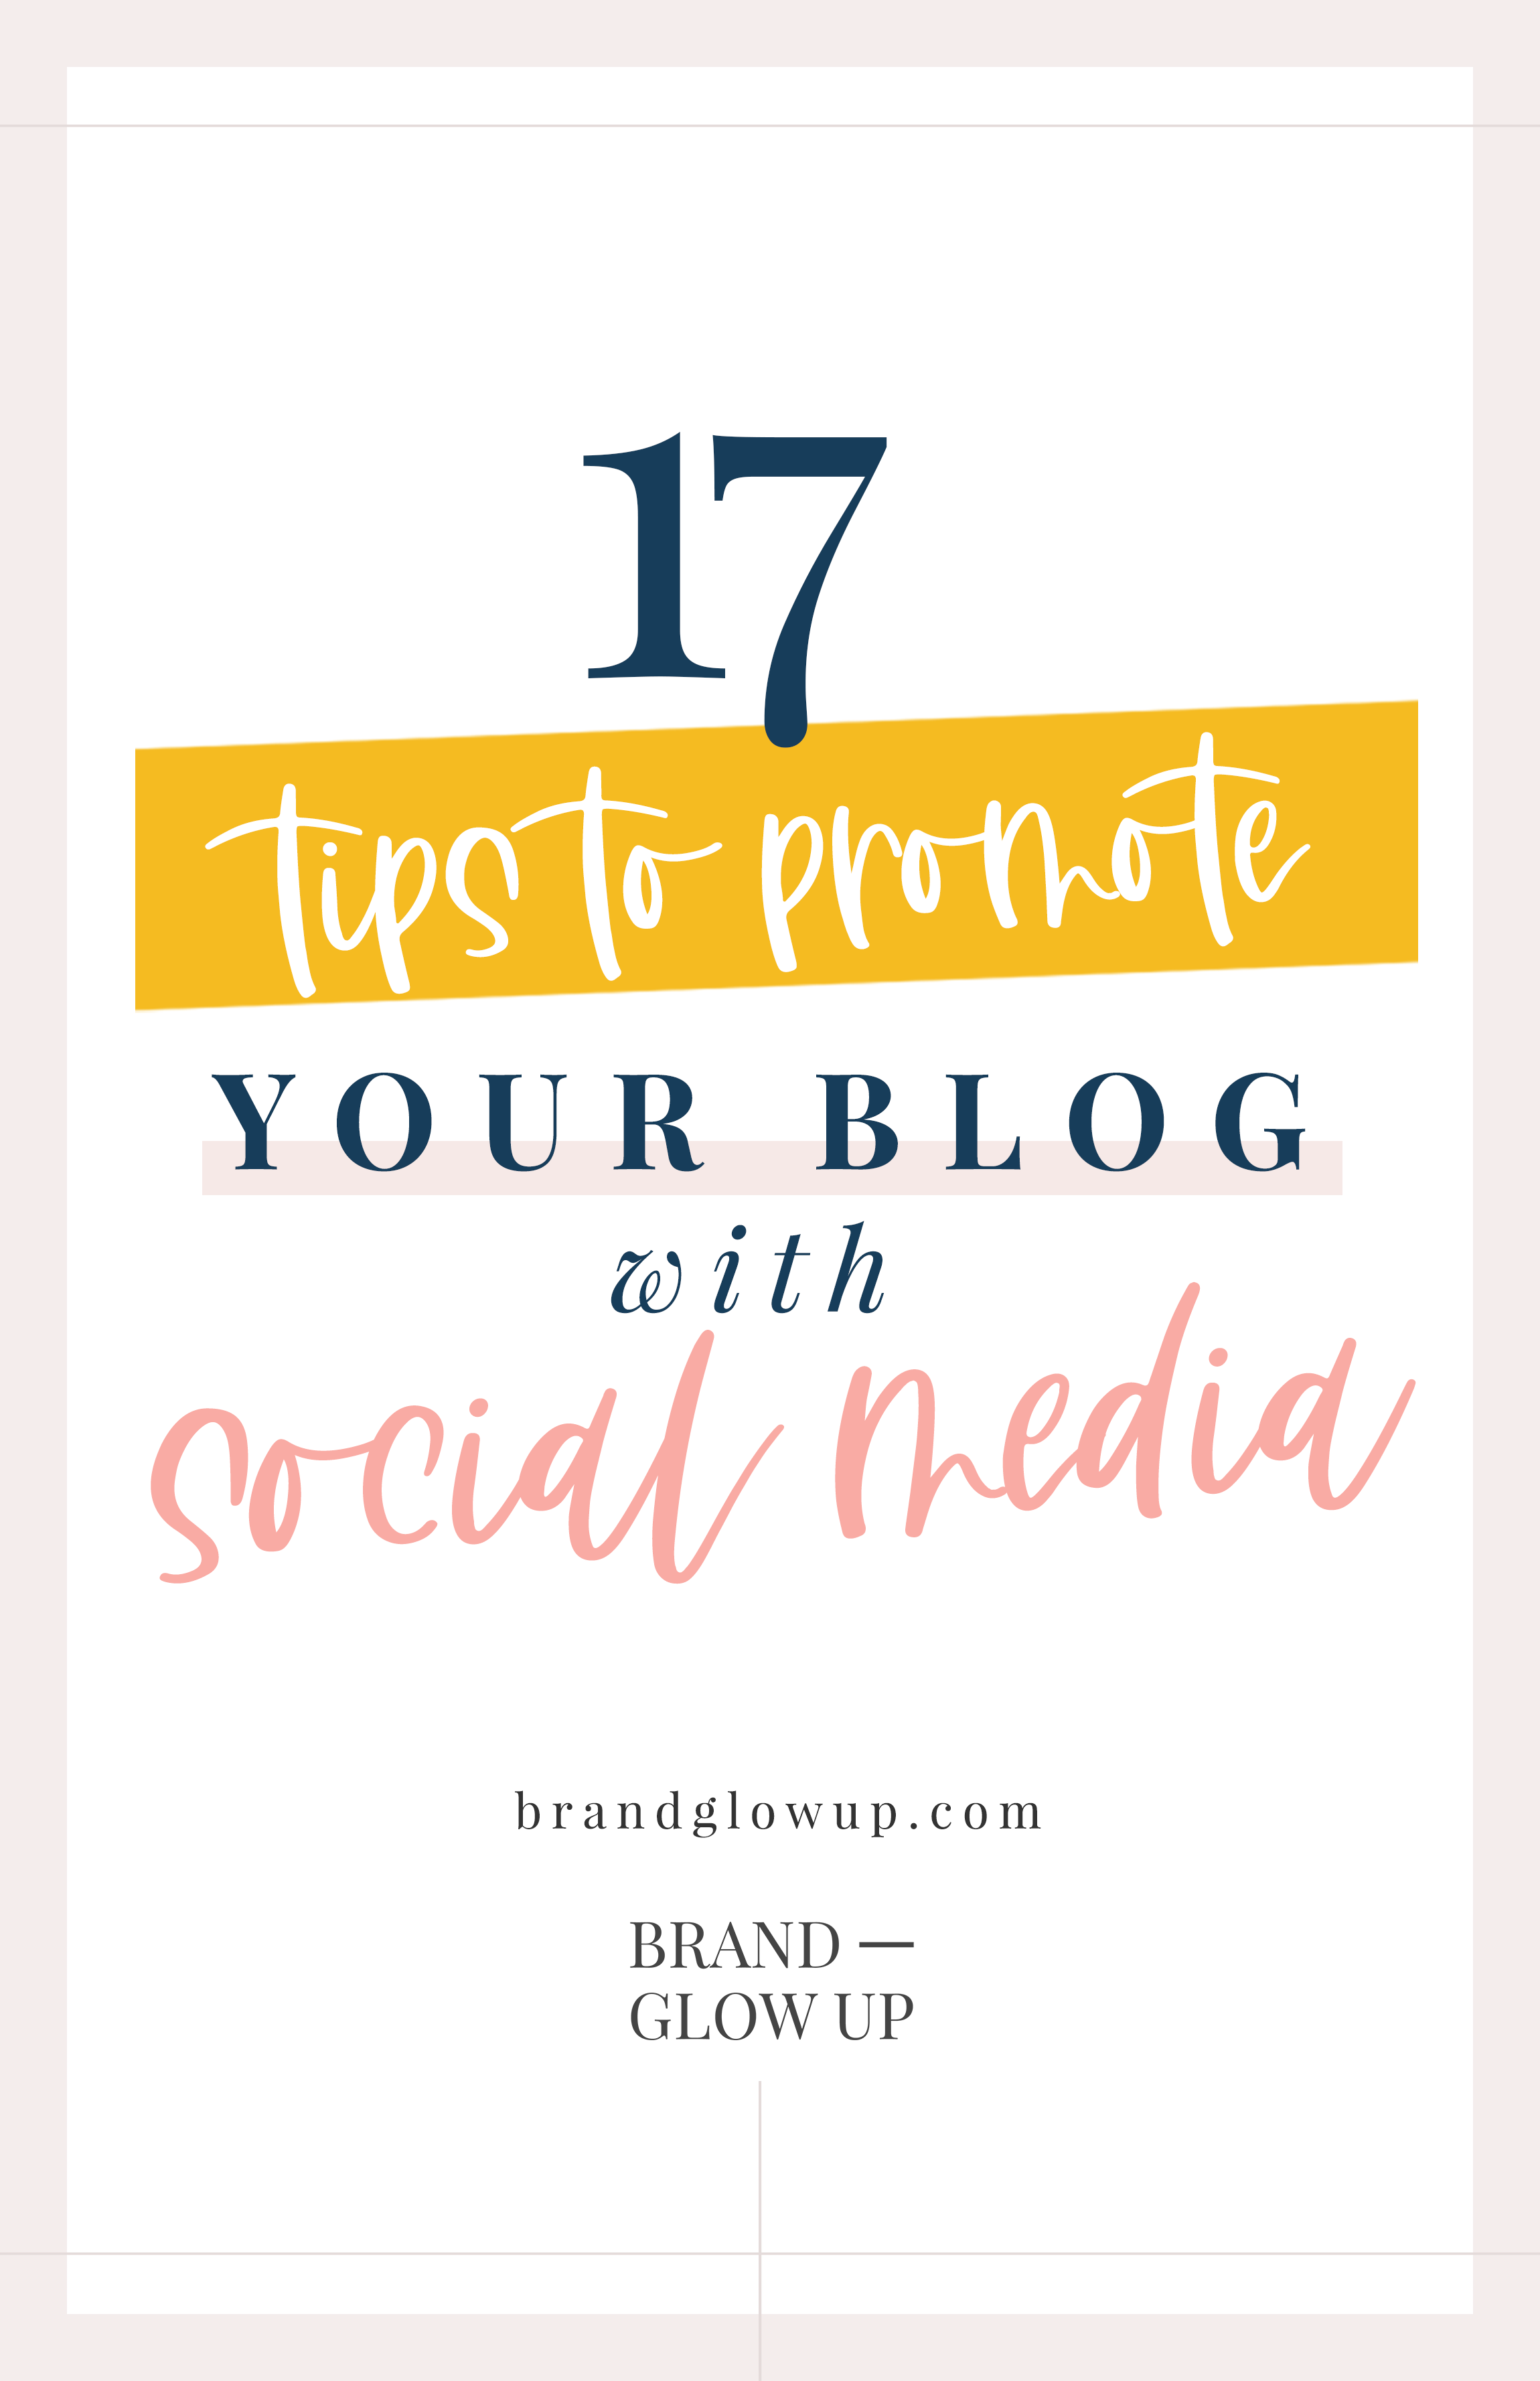 How To Promote Your Blog with Social Media